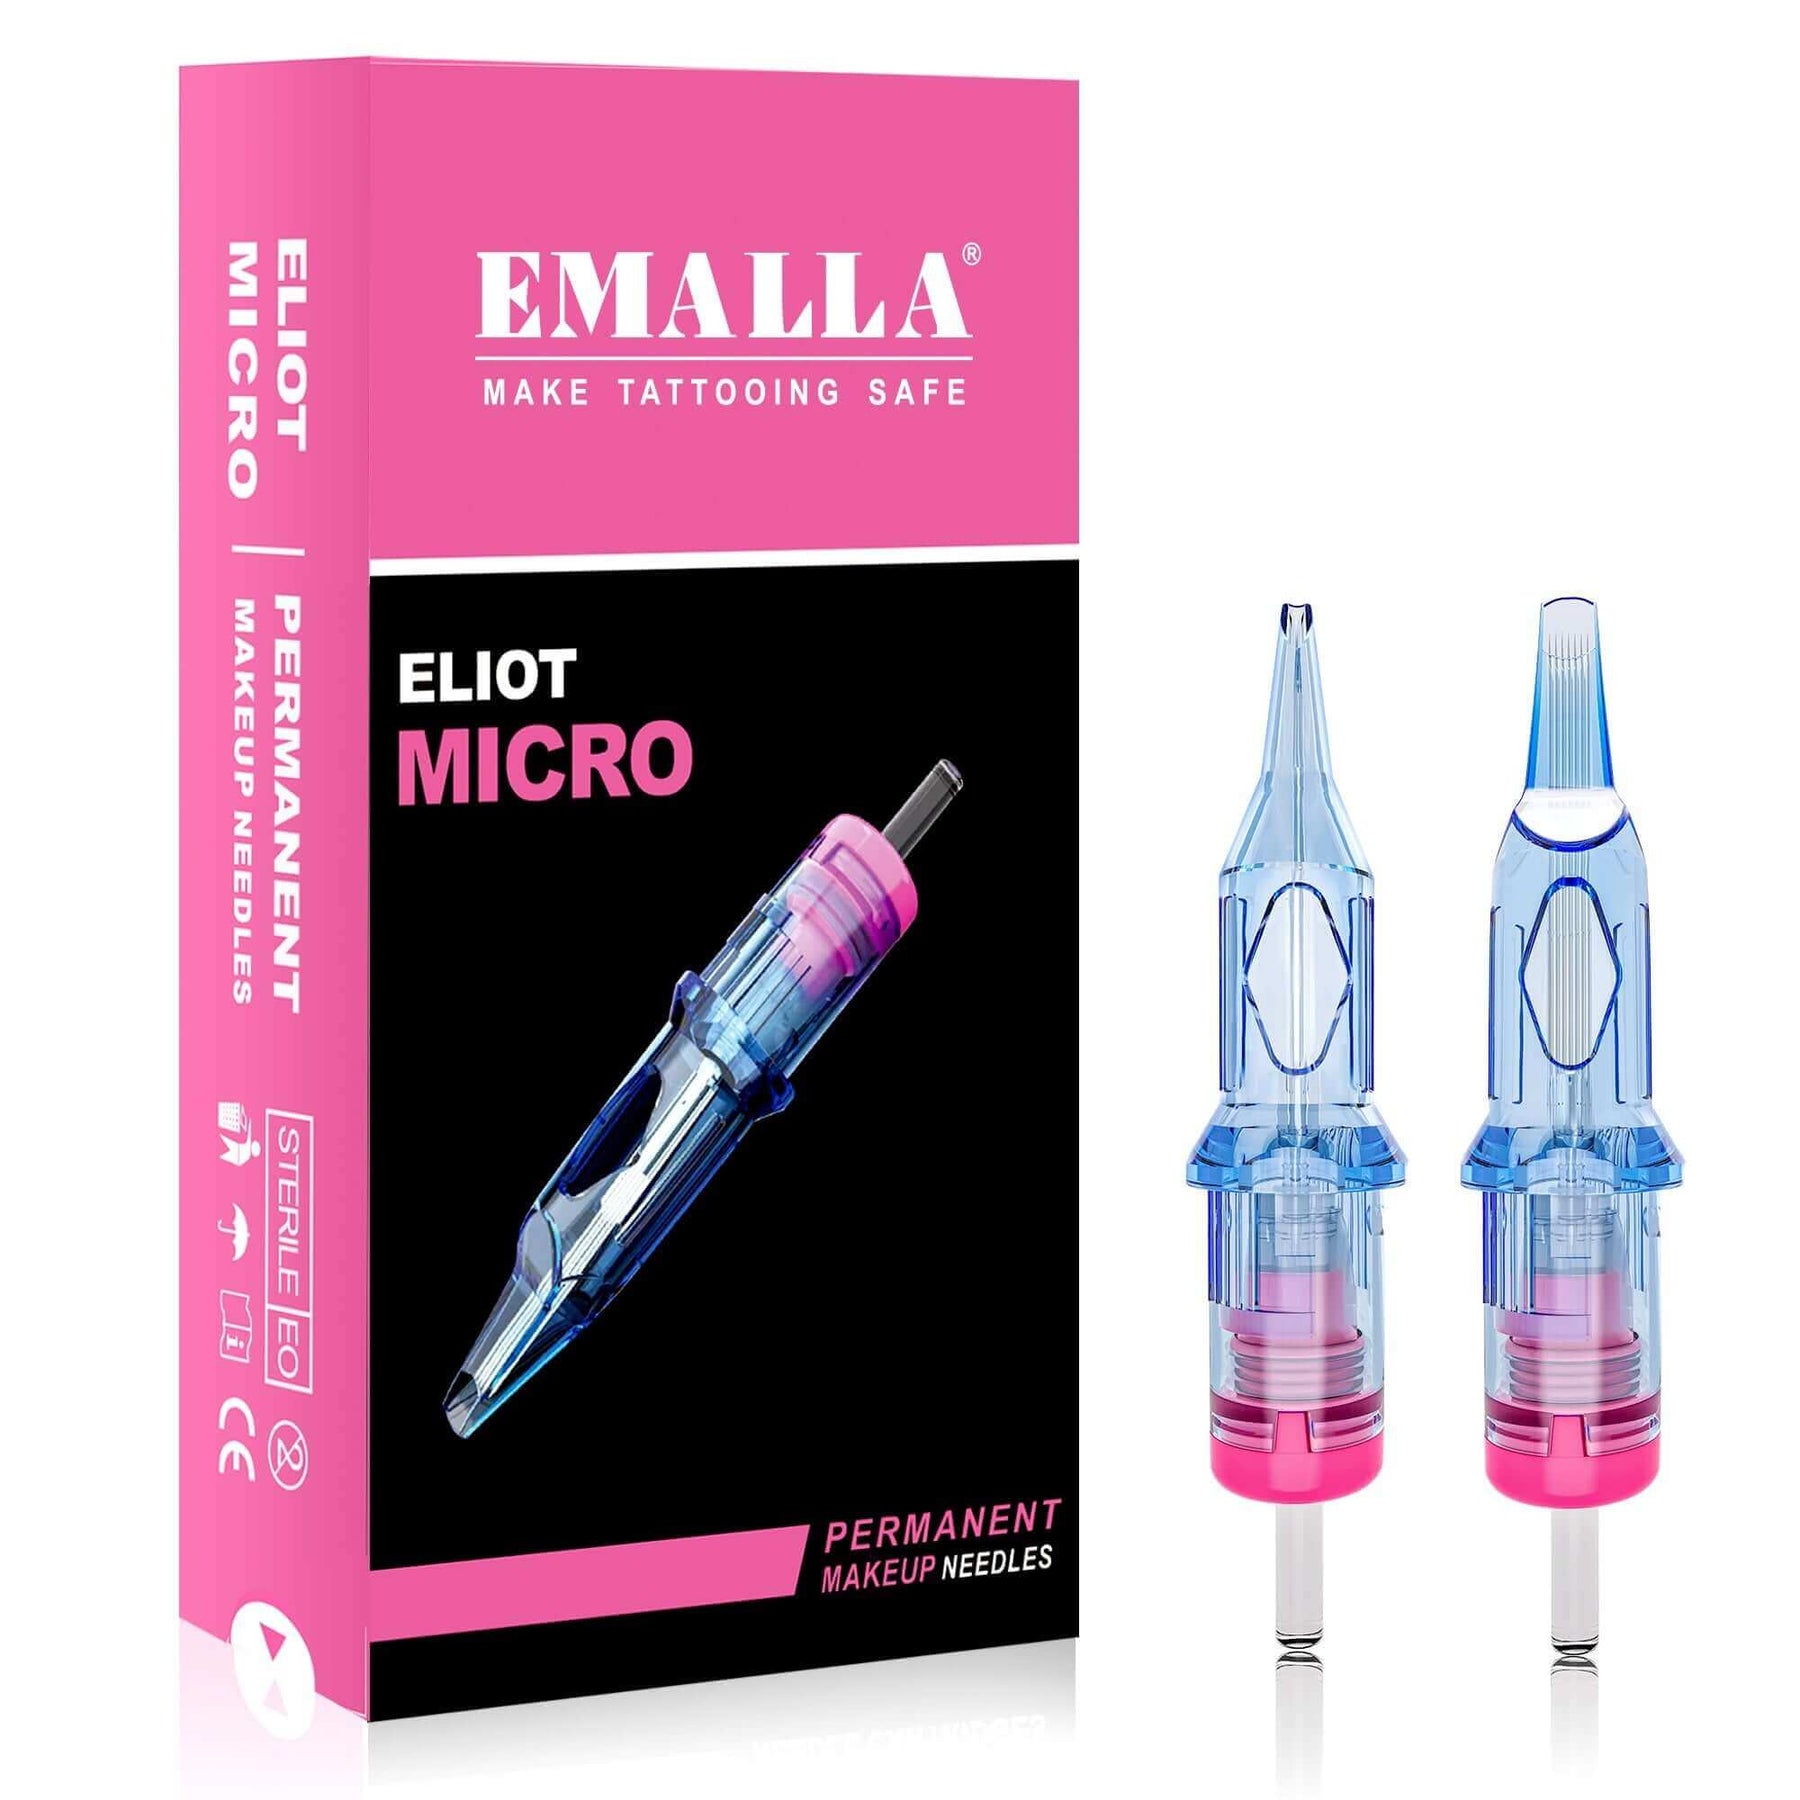 Package of EMALLA ELIOT MICRO PMU Cartridge Needles Flat from front view